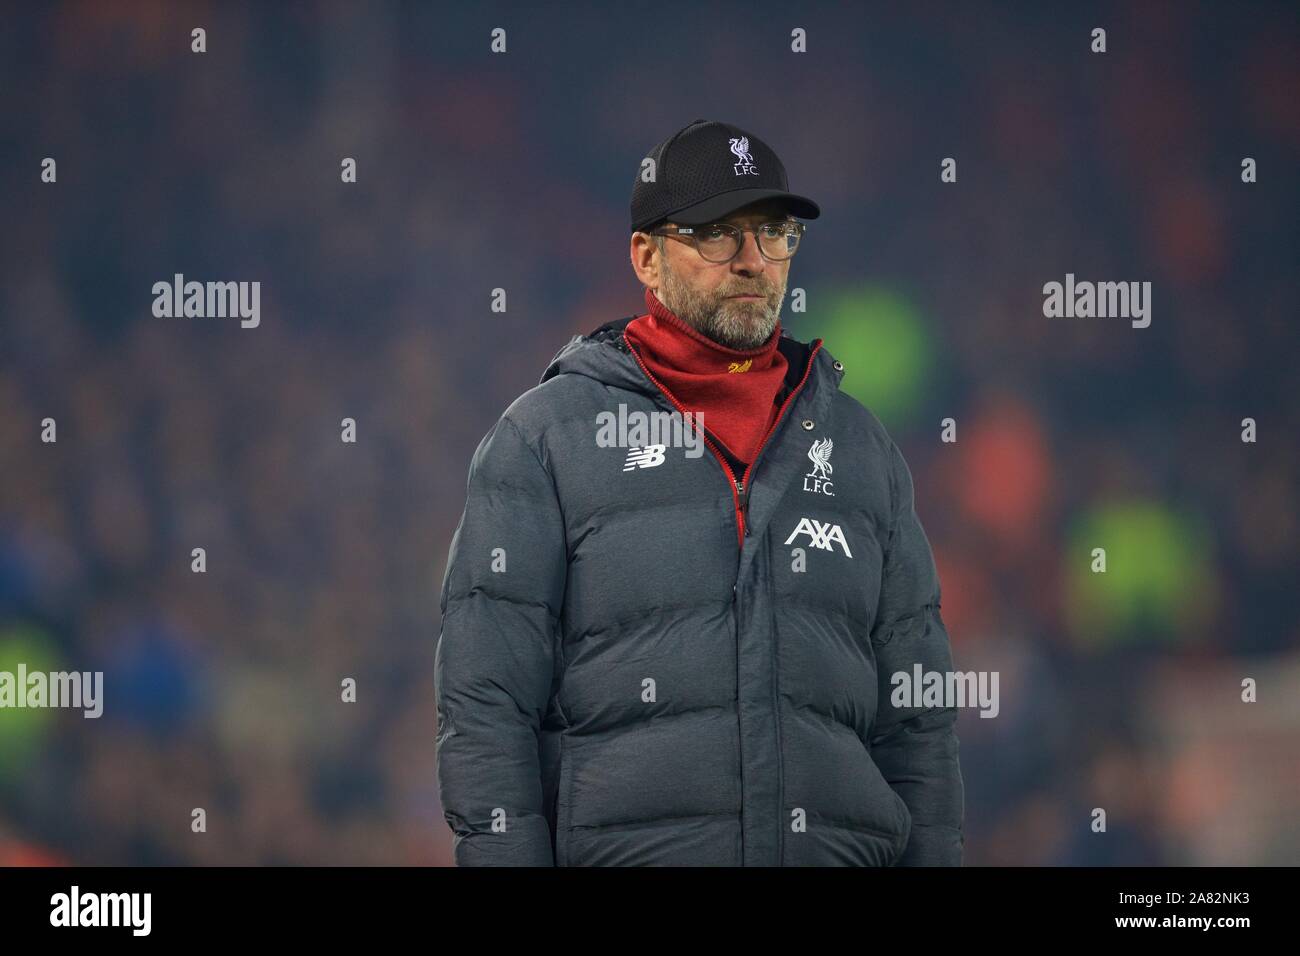 Liverpool. 6th Nov, 2019. Liverpool's manager Jurgen Klopp is seen before the UEFA Champions League Group E match soccer between Liverpool FC and KRC Genk at Anfield in Liverpool, Britain on Nov. 5, 2019. Credit: Xinhua/Alamy Live News Stock Photo